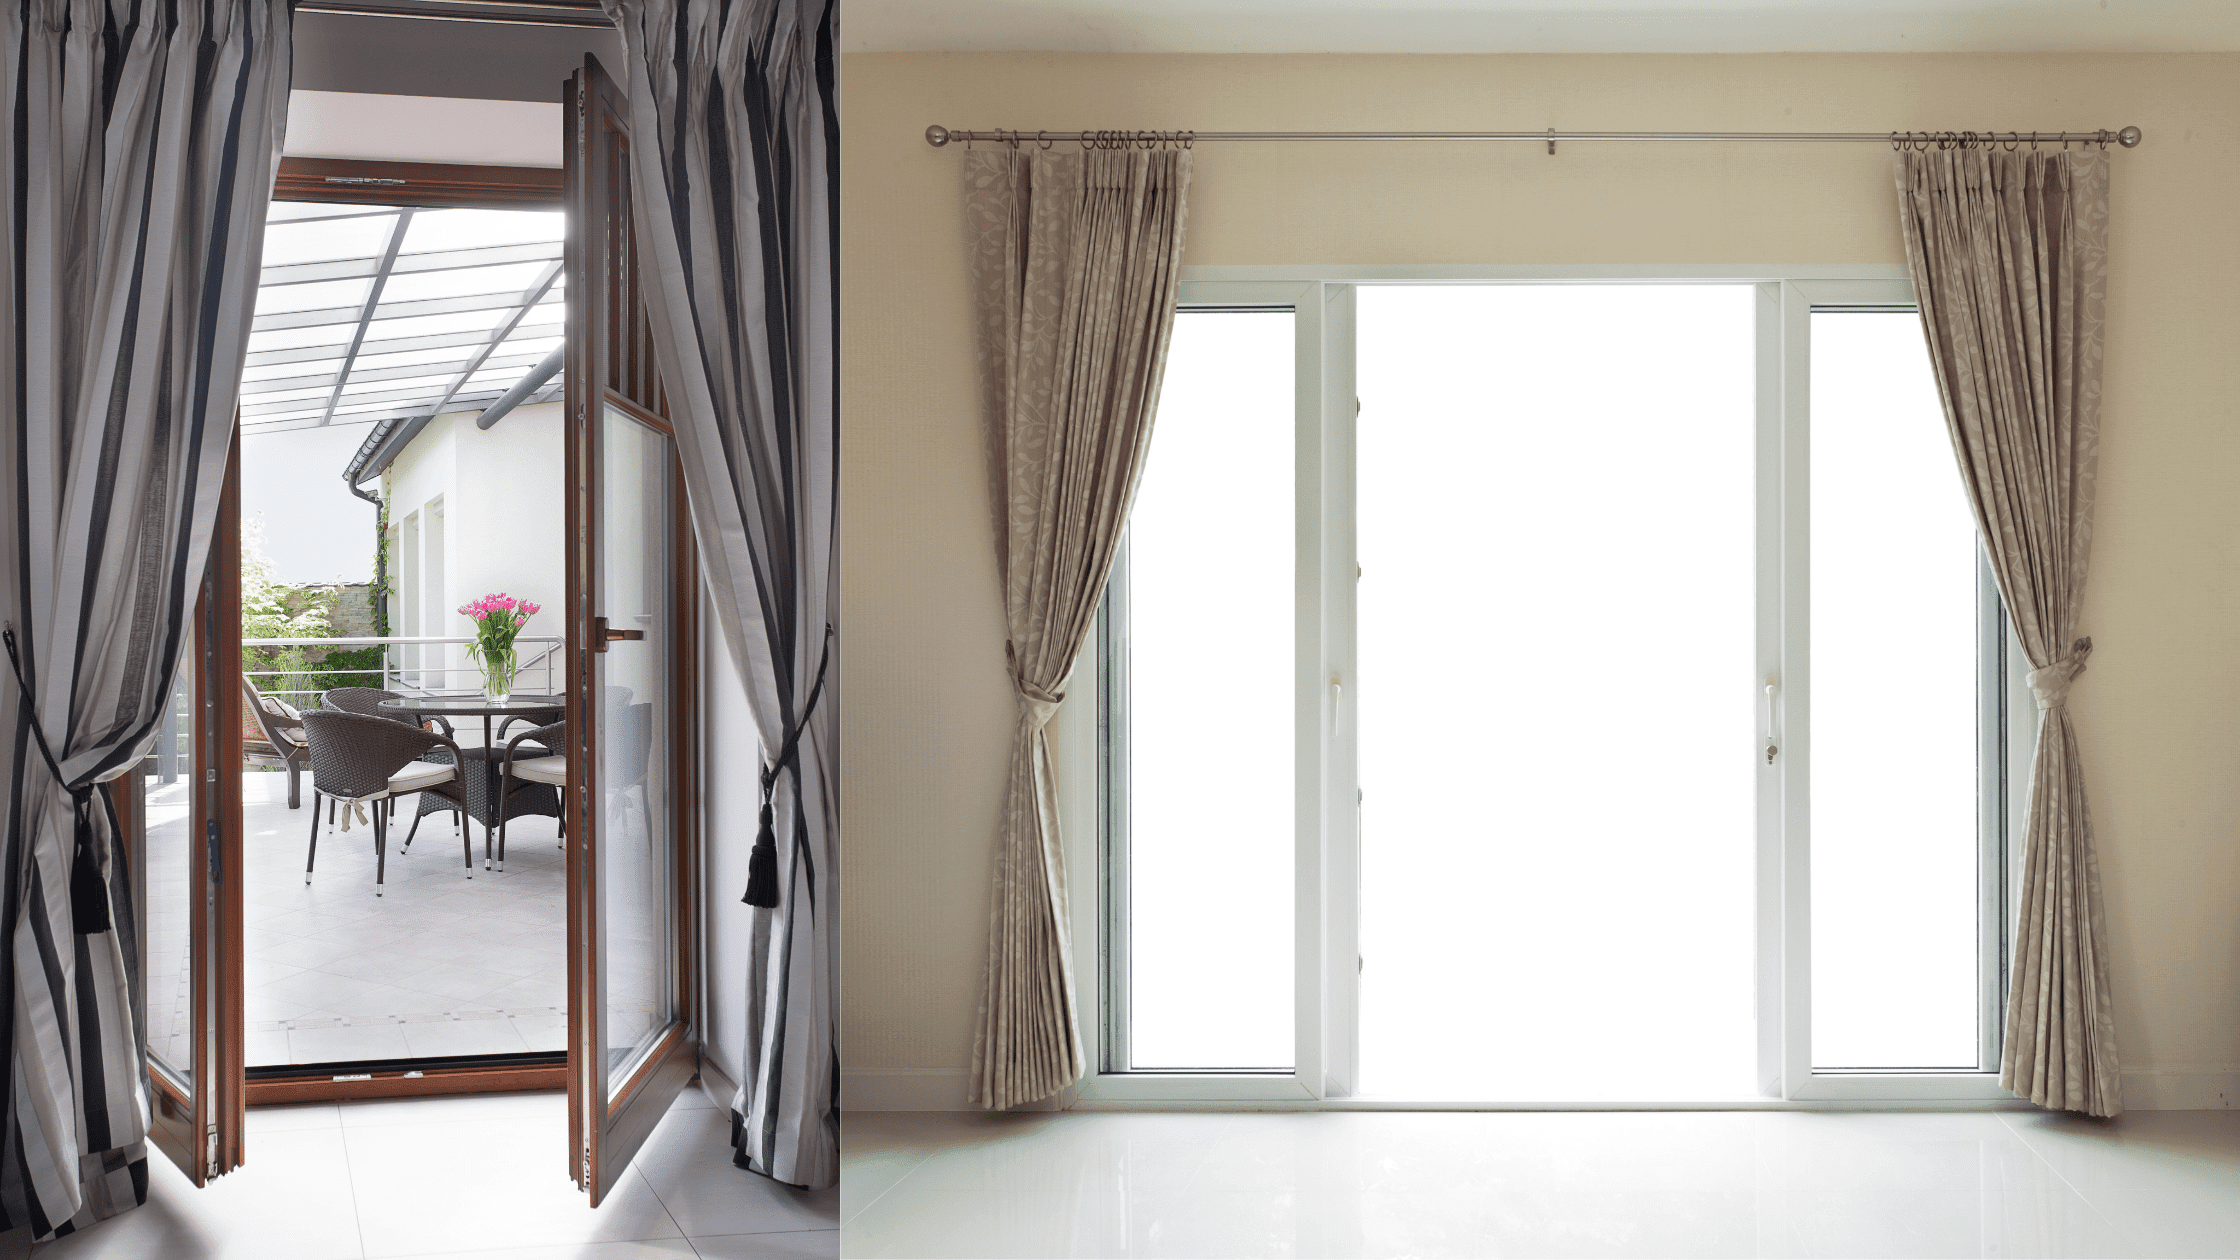 -G Winter Cotton Door Curtain Wind-Proof Keep Warm soundproof Curtain Home Dormitory PU Noise-100x200Cm 39x79Inch